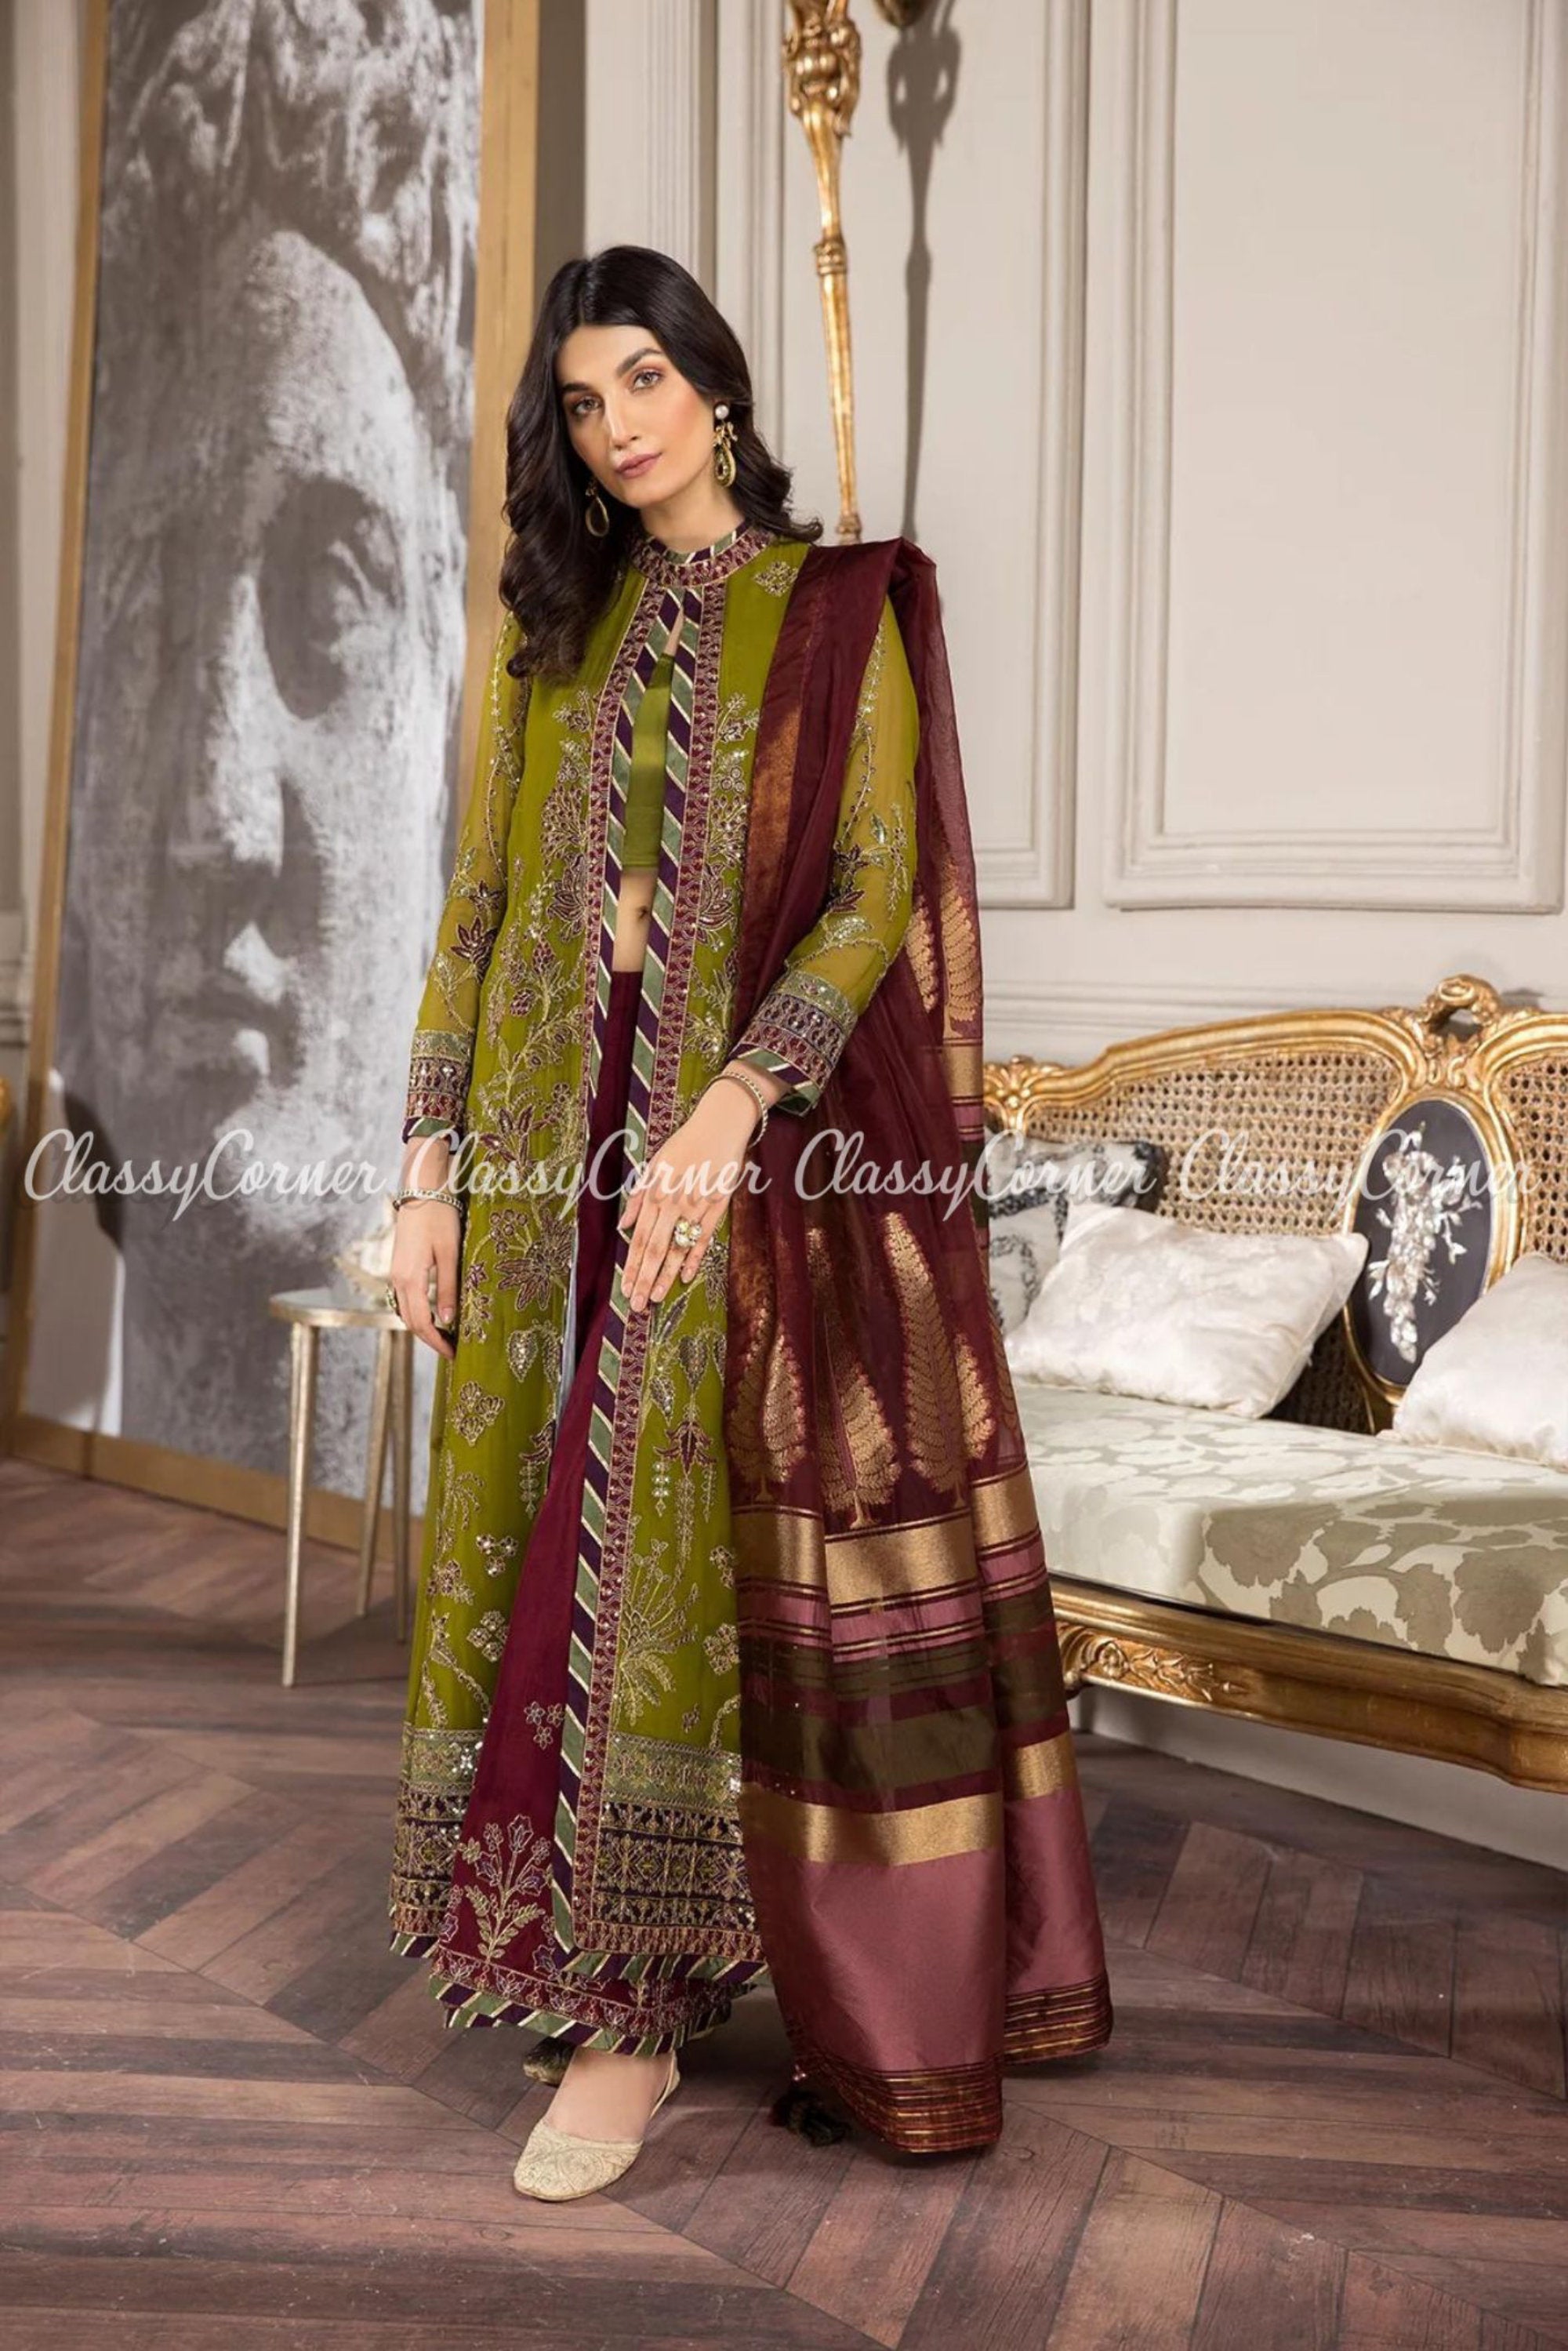 Olive Green Red Chiffo Embroidered Party Wear Salwar Kameez - Classy Corner